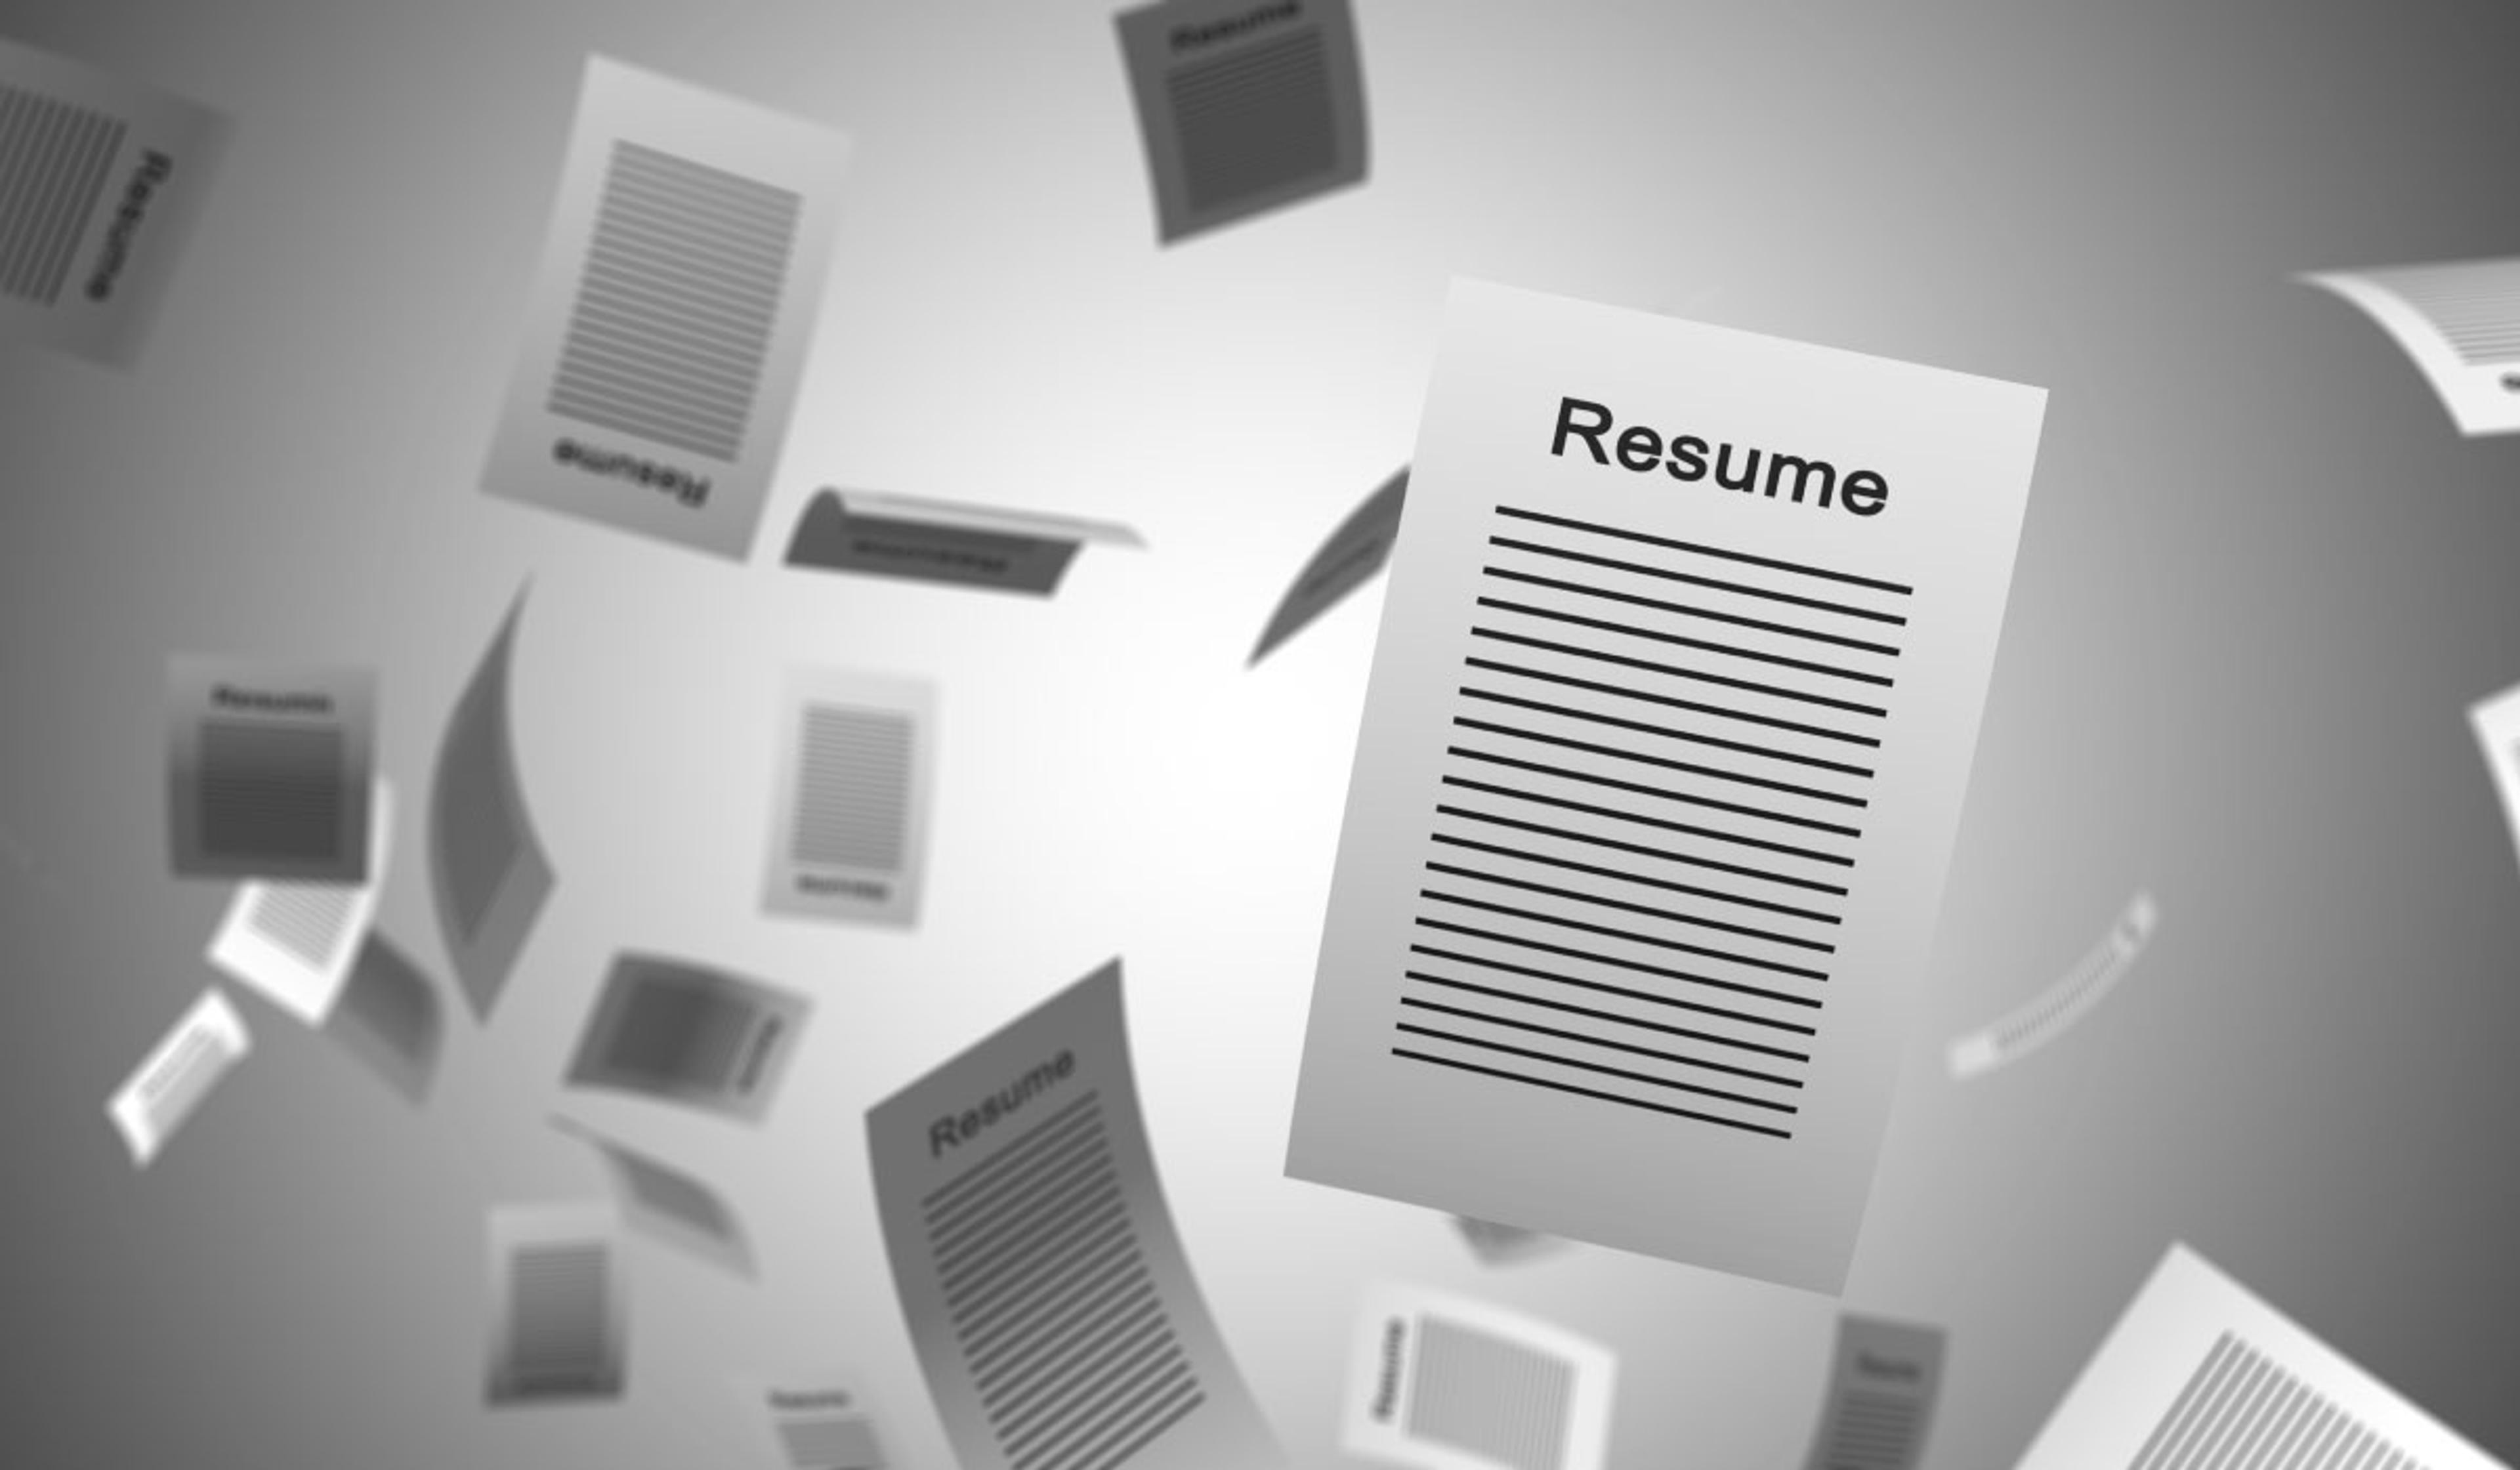 Get Past the Computers: Create a Pilot Resume that Makes the Cut